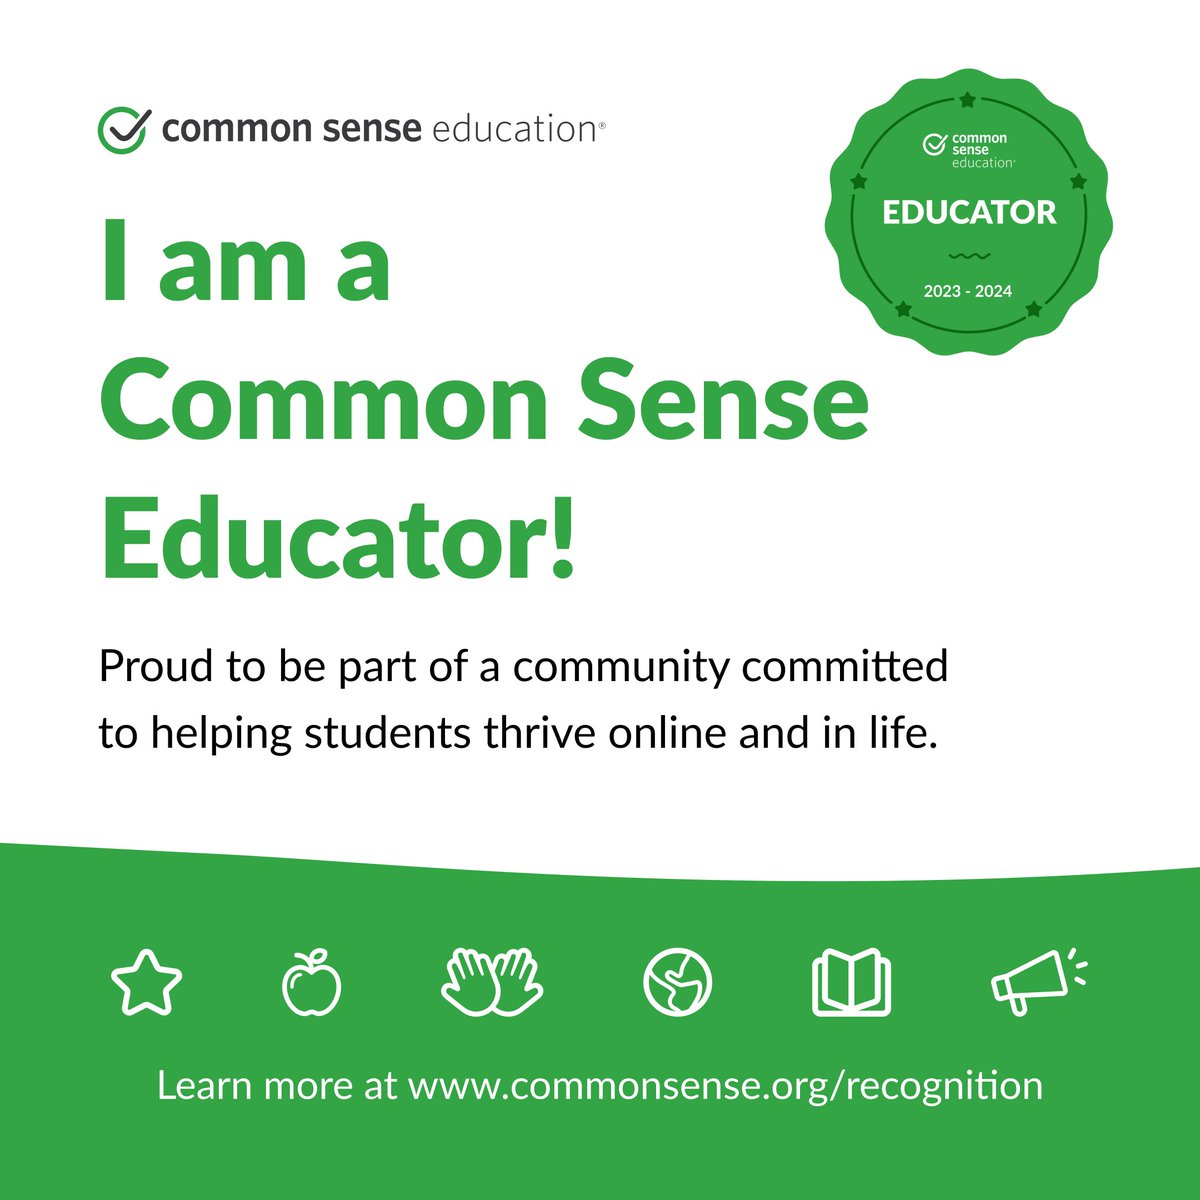 ⭐ I am a Common Sense 🍎 Educator! 🎉
Proud to be part of a community committed to helping students thrive online and in life.
Thank you @CommonSenseEd 
 @saadmarkou #edtech #miee #يوميات_معلم_مغربي